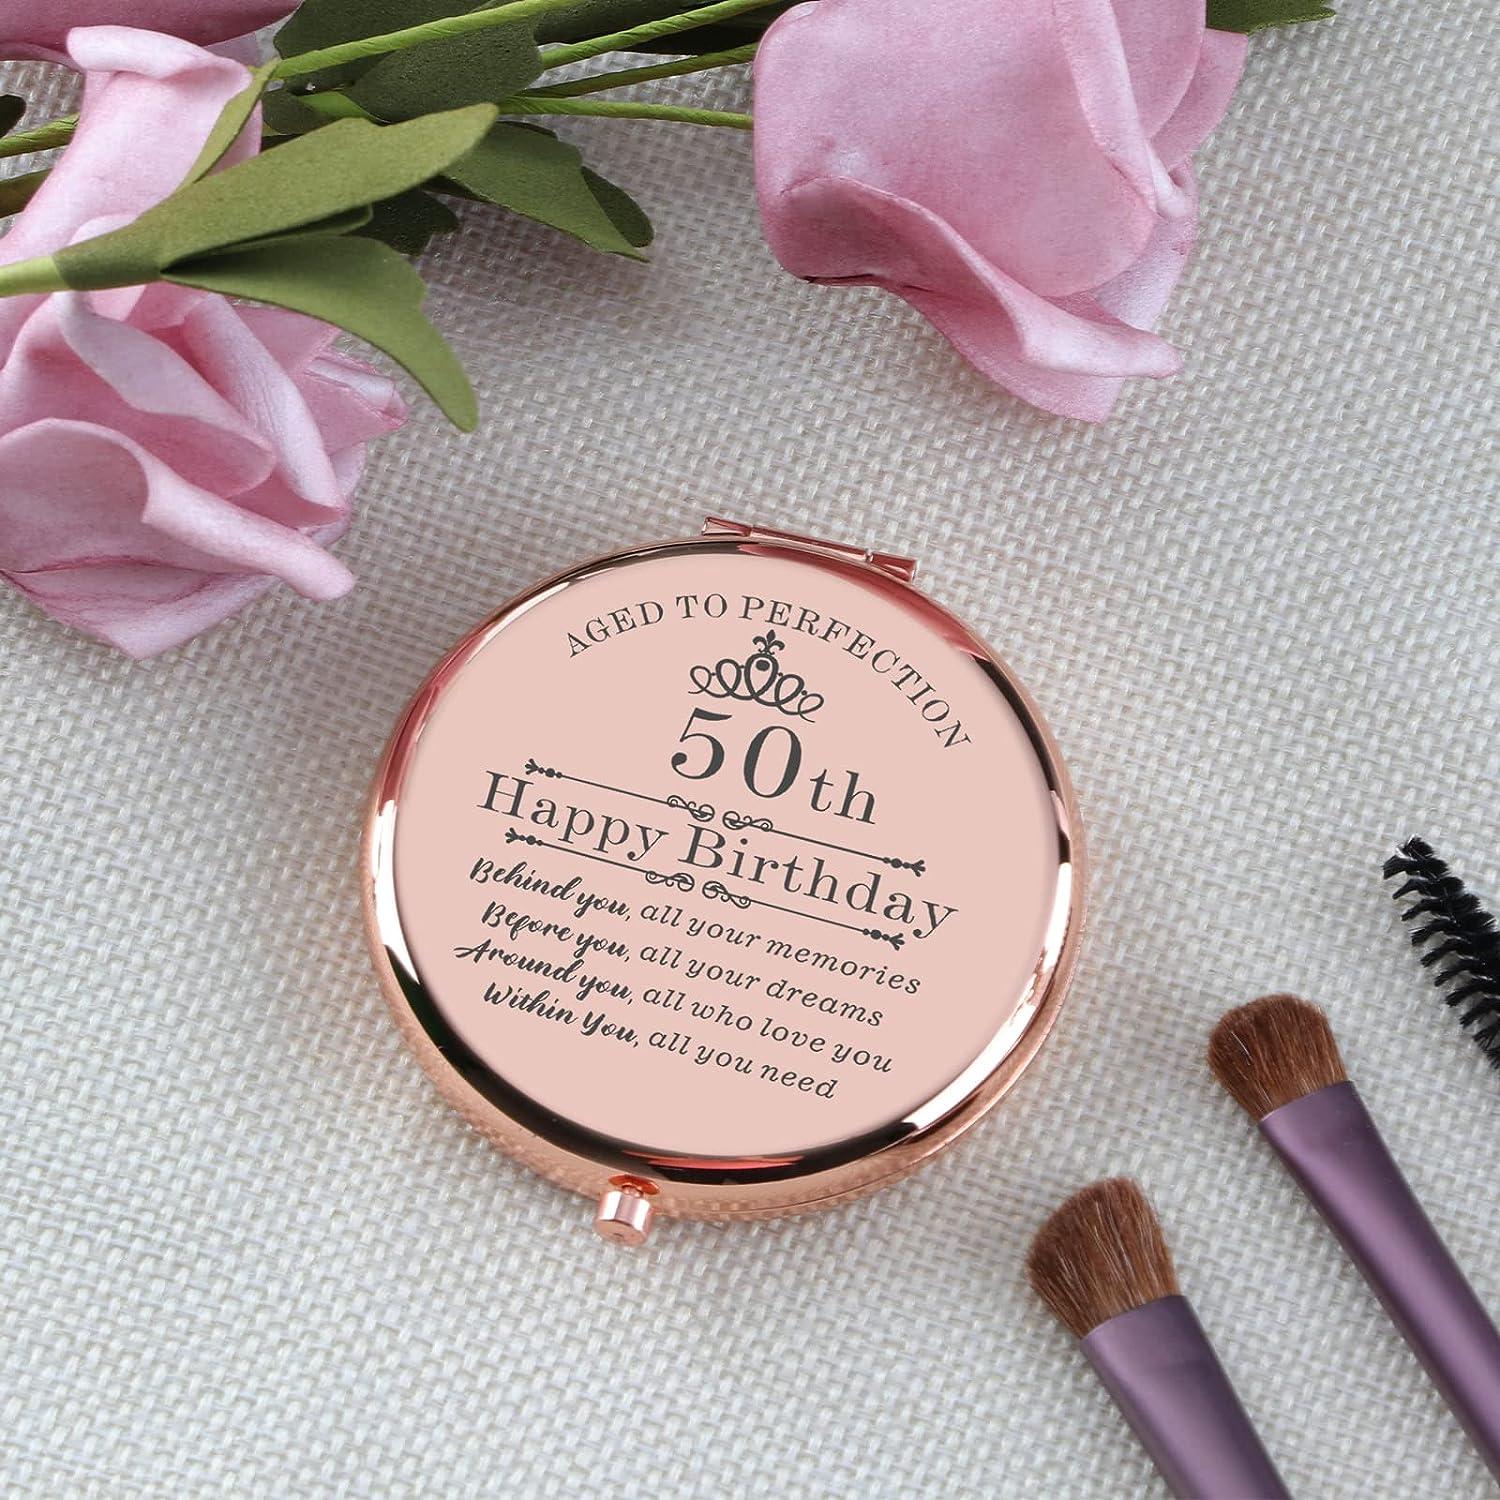 50th Birthday Gifts for Women, 50 Birthday Compact Mirror, Gifts for Women Turning 50, Women 50th Birthday Gifts Ideas, 50th Birthday Makeup Bag, 50th